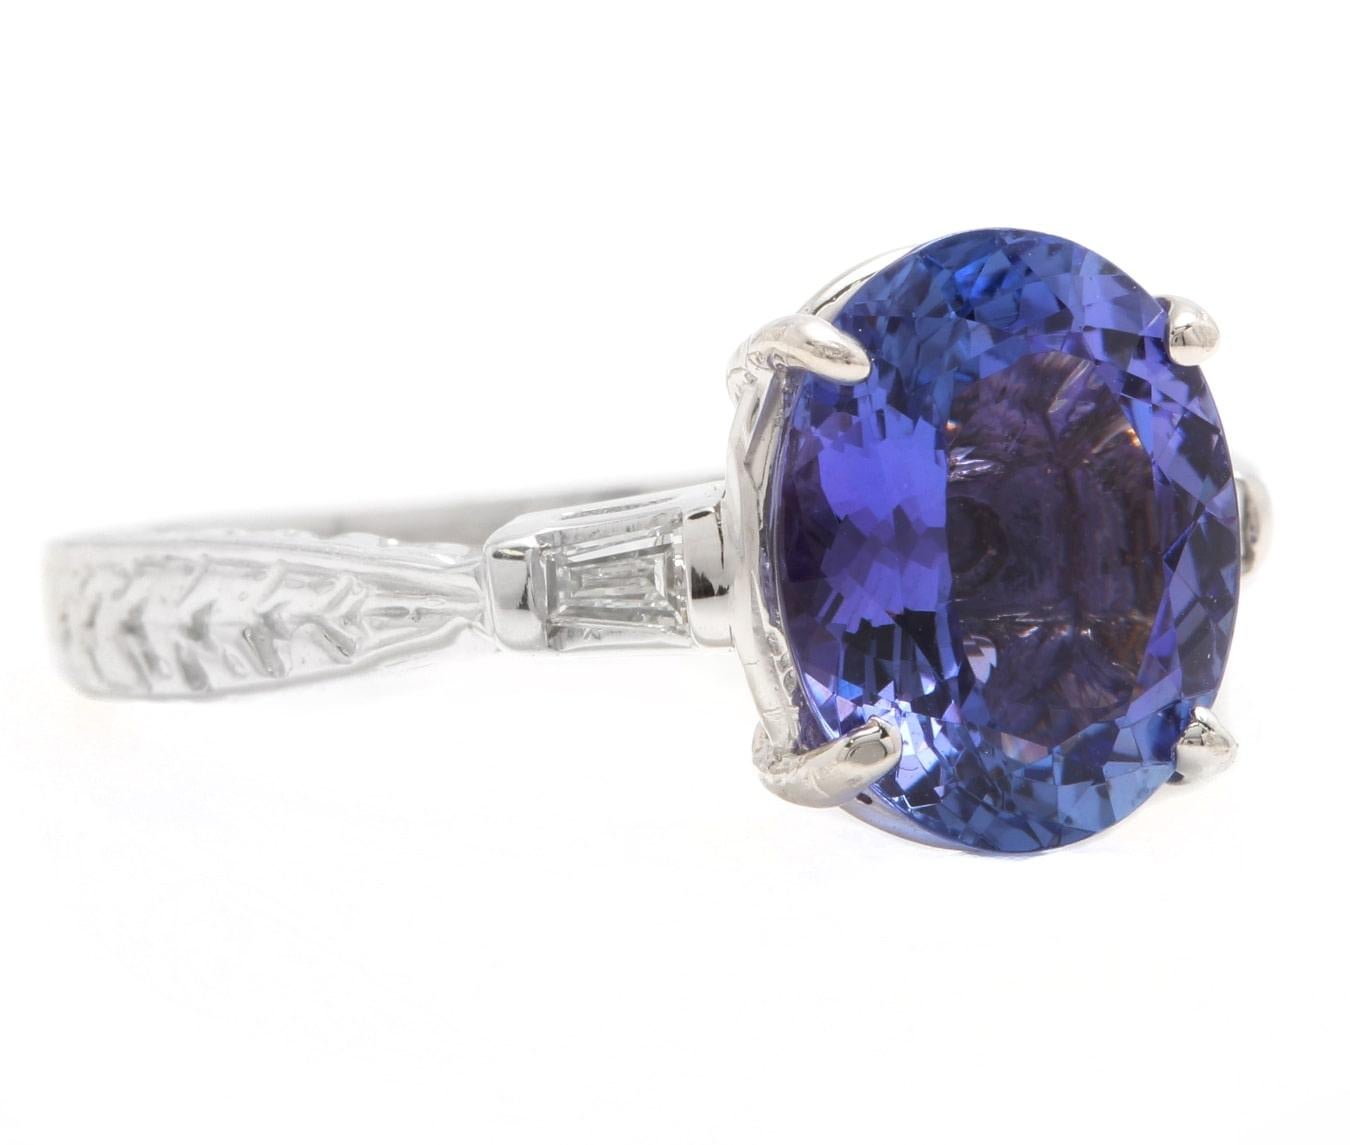 3.14 Carats Natural Very Nice Looking Tanzanite and Diamond 14K Solid White Gold Ring

Suggested Replacement Value:  $4,500.00

Total Natural Oval Cut Tanzanite Weight is: Approx. 3.00 Carats 

Tanzanite Measures: 1100 x 9.00mm

Natural Baguette